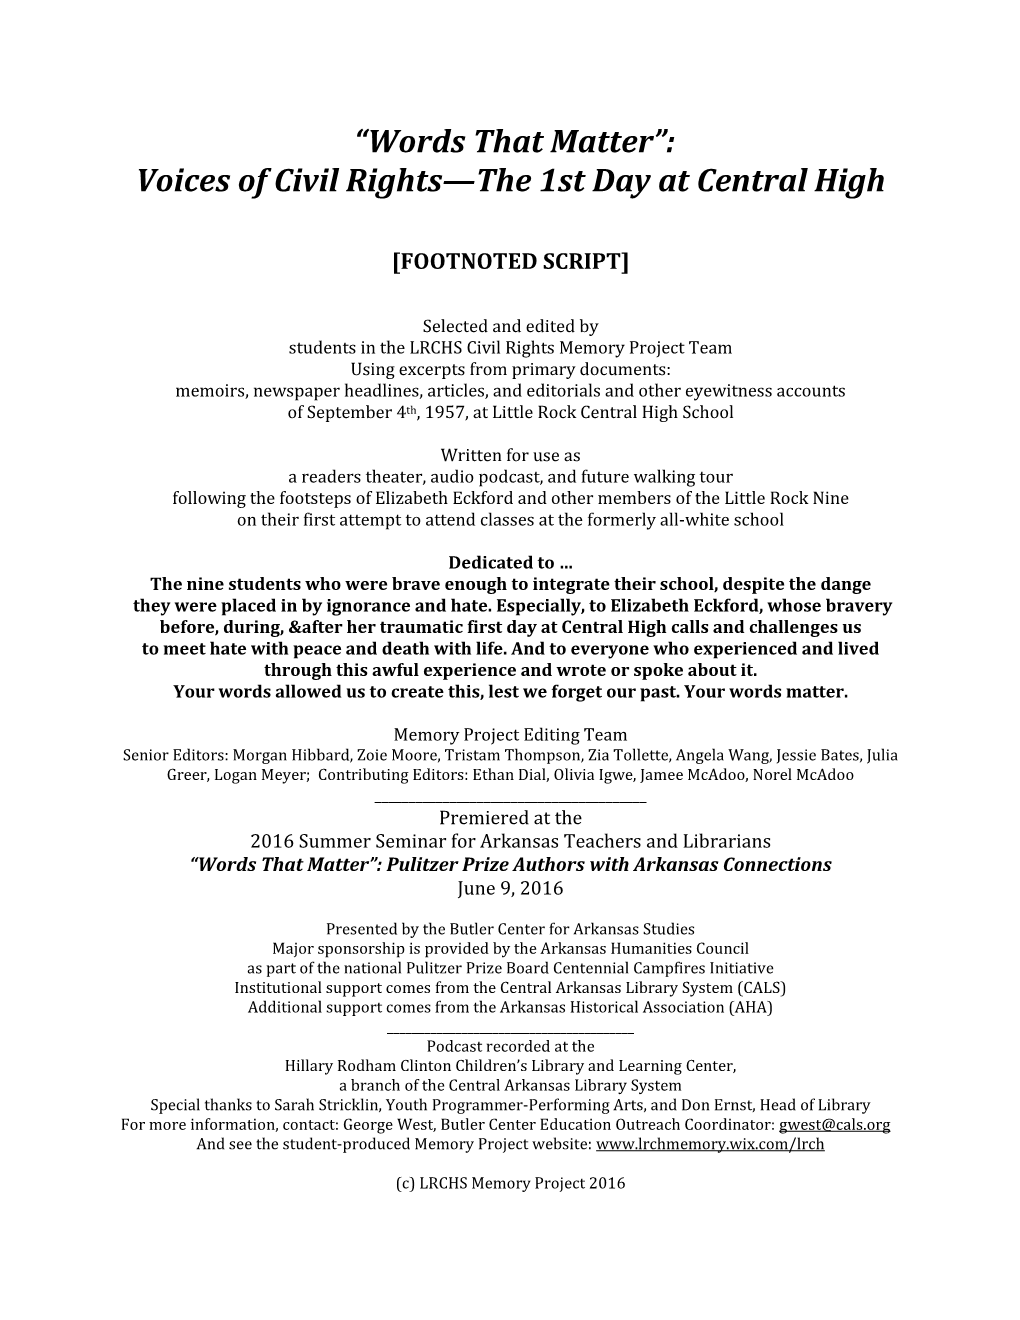 Voices of Civil Rights—The 1St Day at Central High